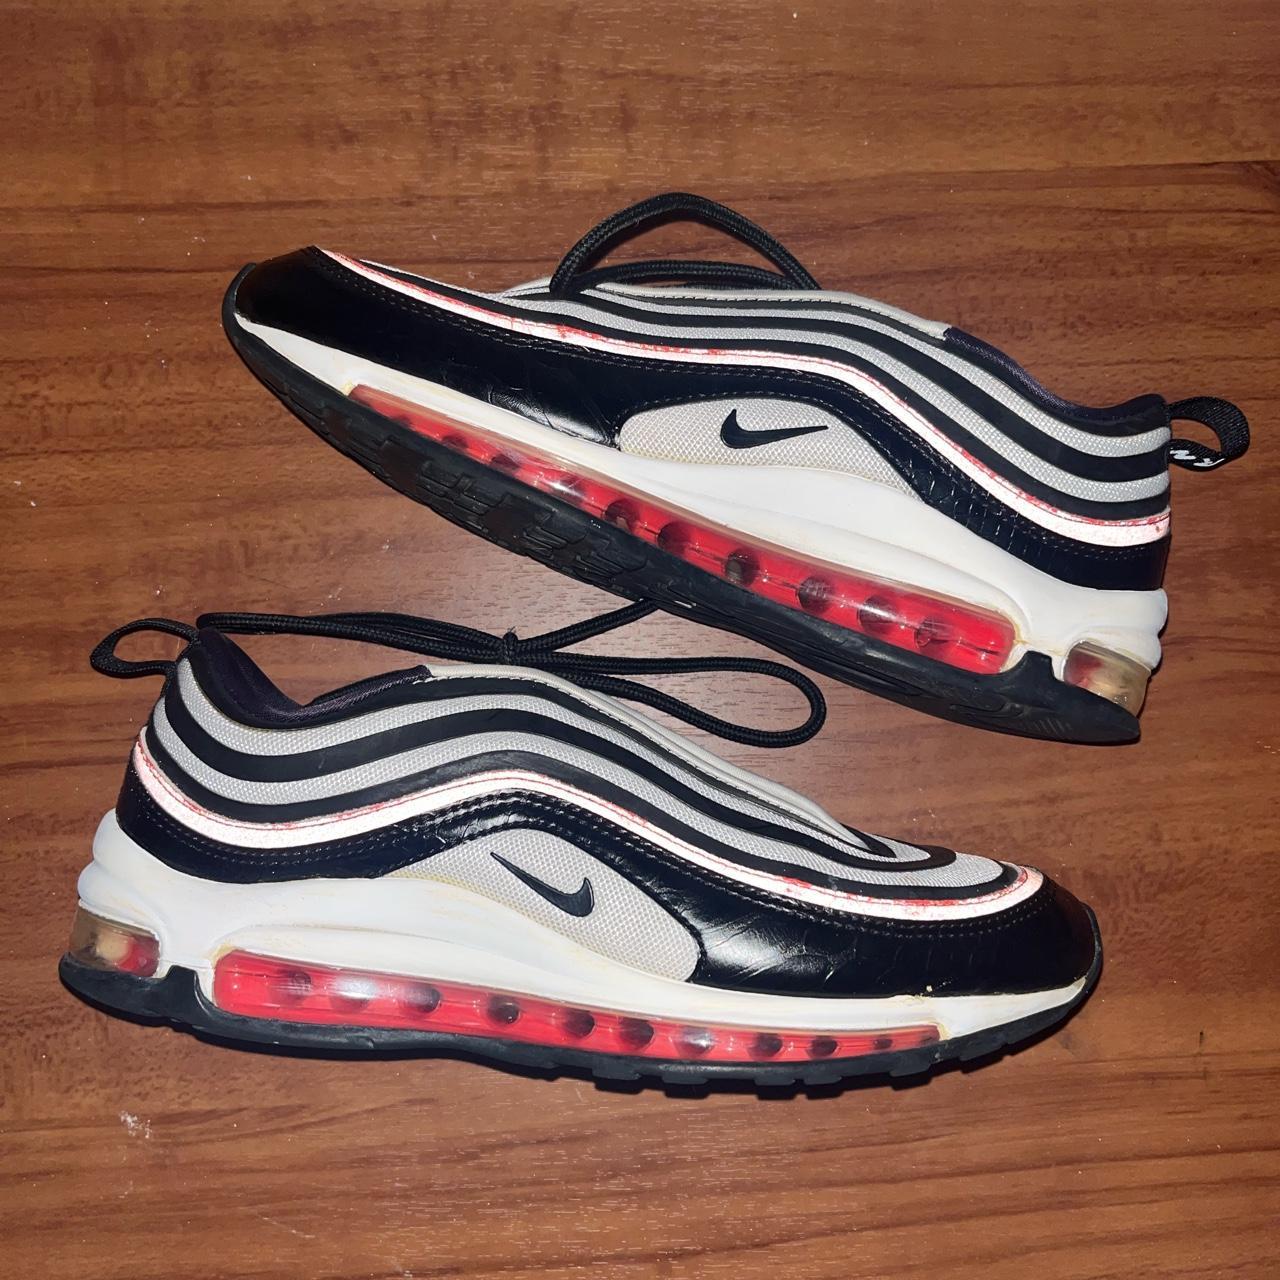 Product Image 1 - Nike Air Max 97

Size 8